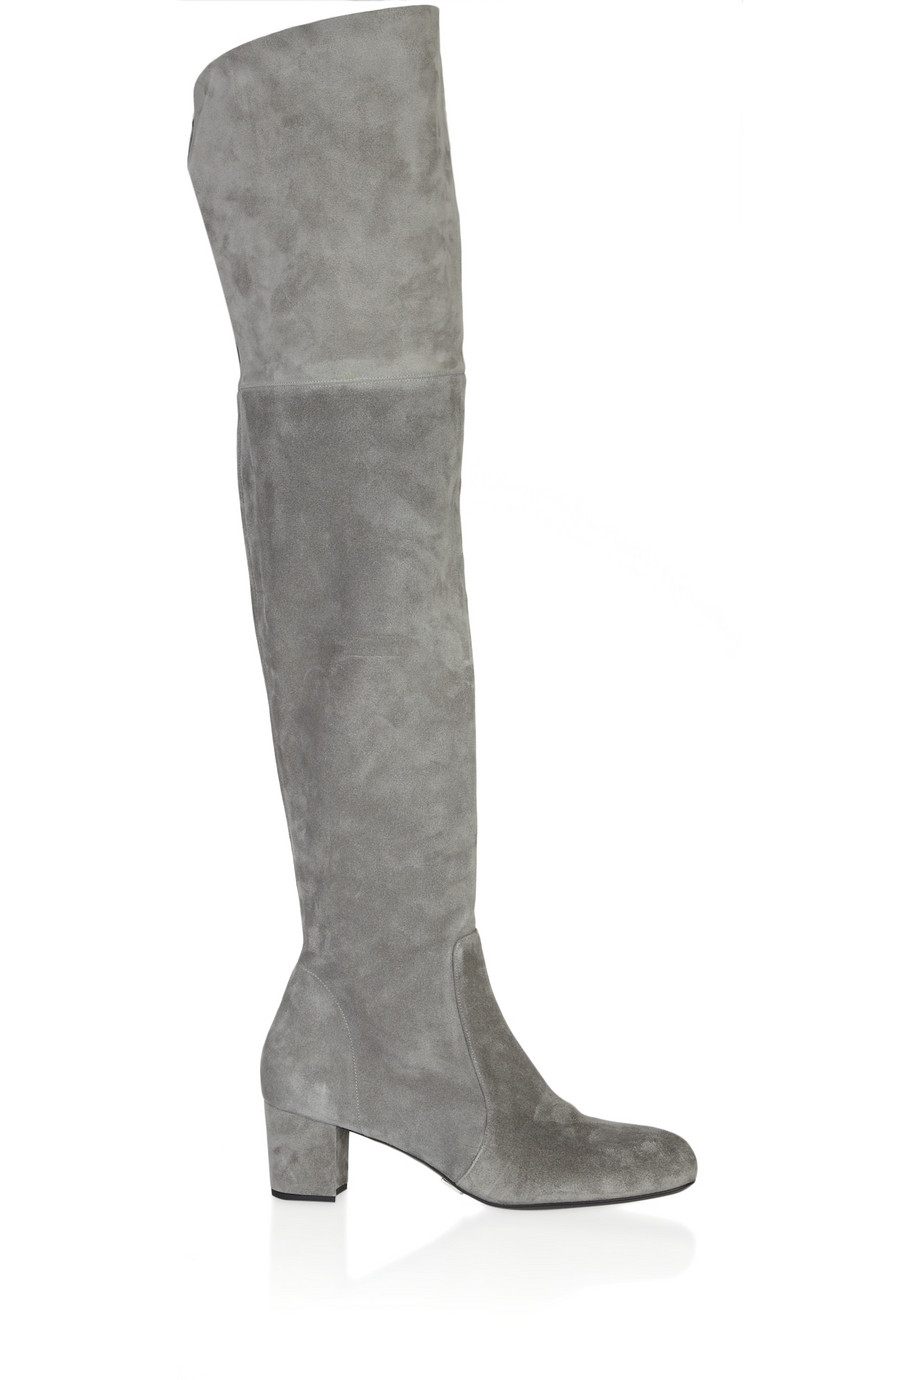 Lyst - Michael kors Suede Over-the-knee Boots in Gray